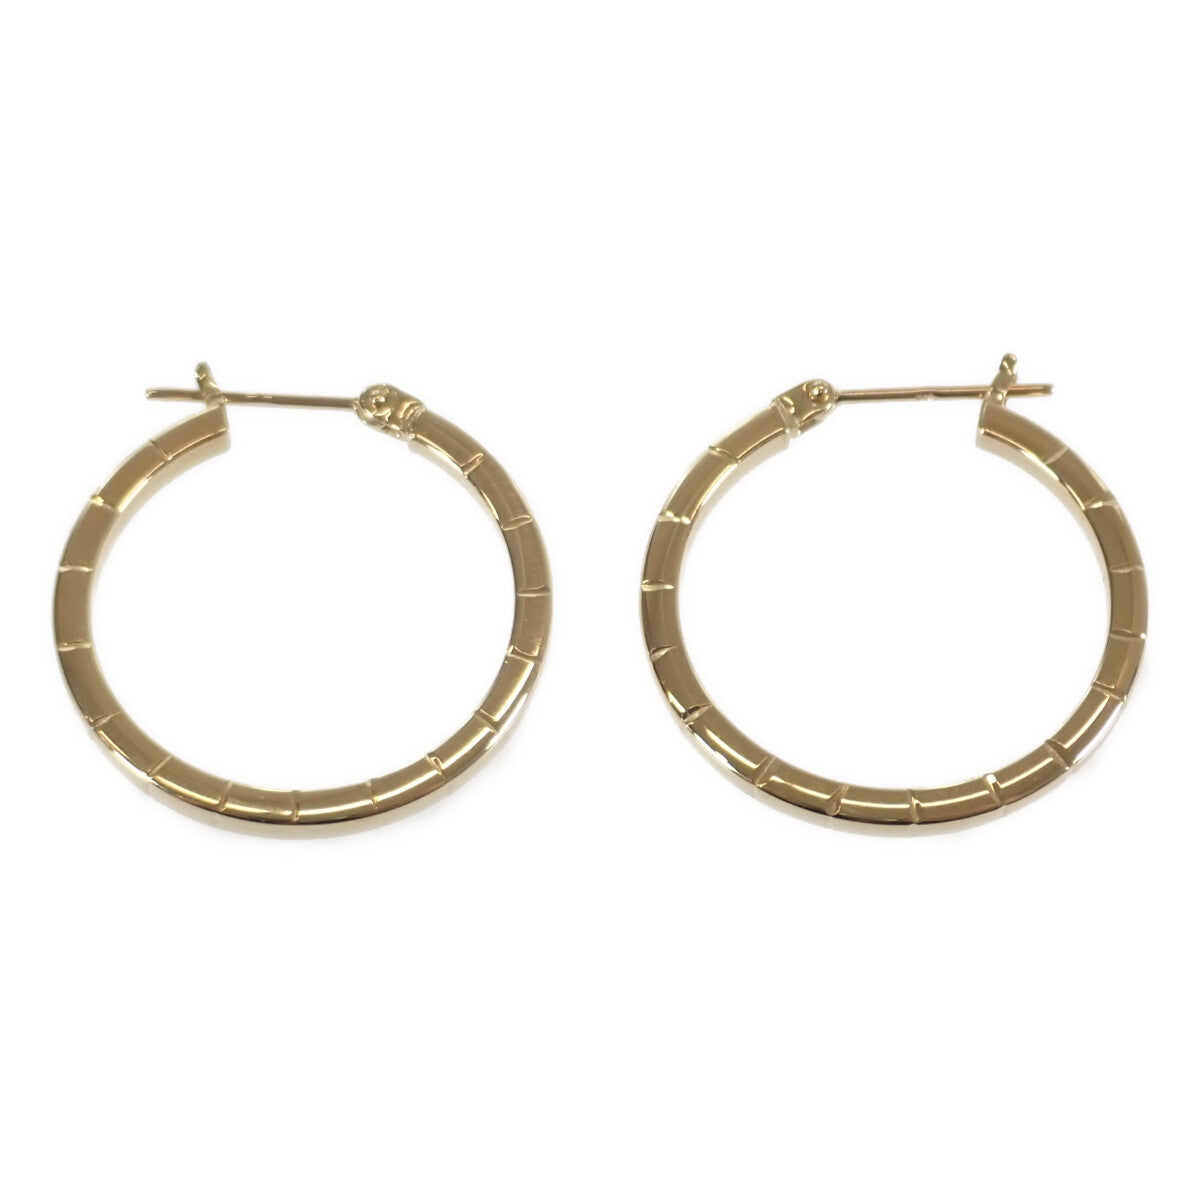 K18 Yellow Gold Hoop Design One-Touch Ring Earrings, Ladies’, Preowned